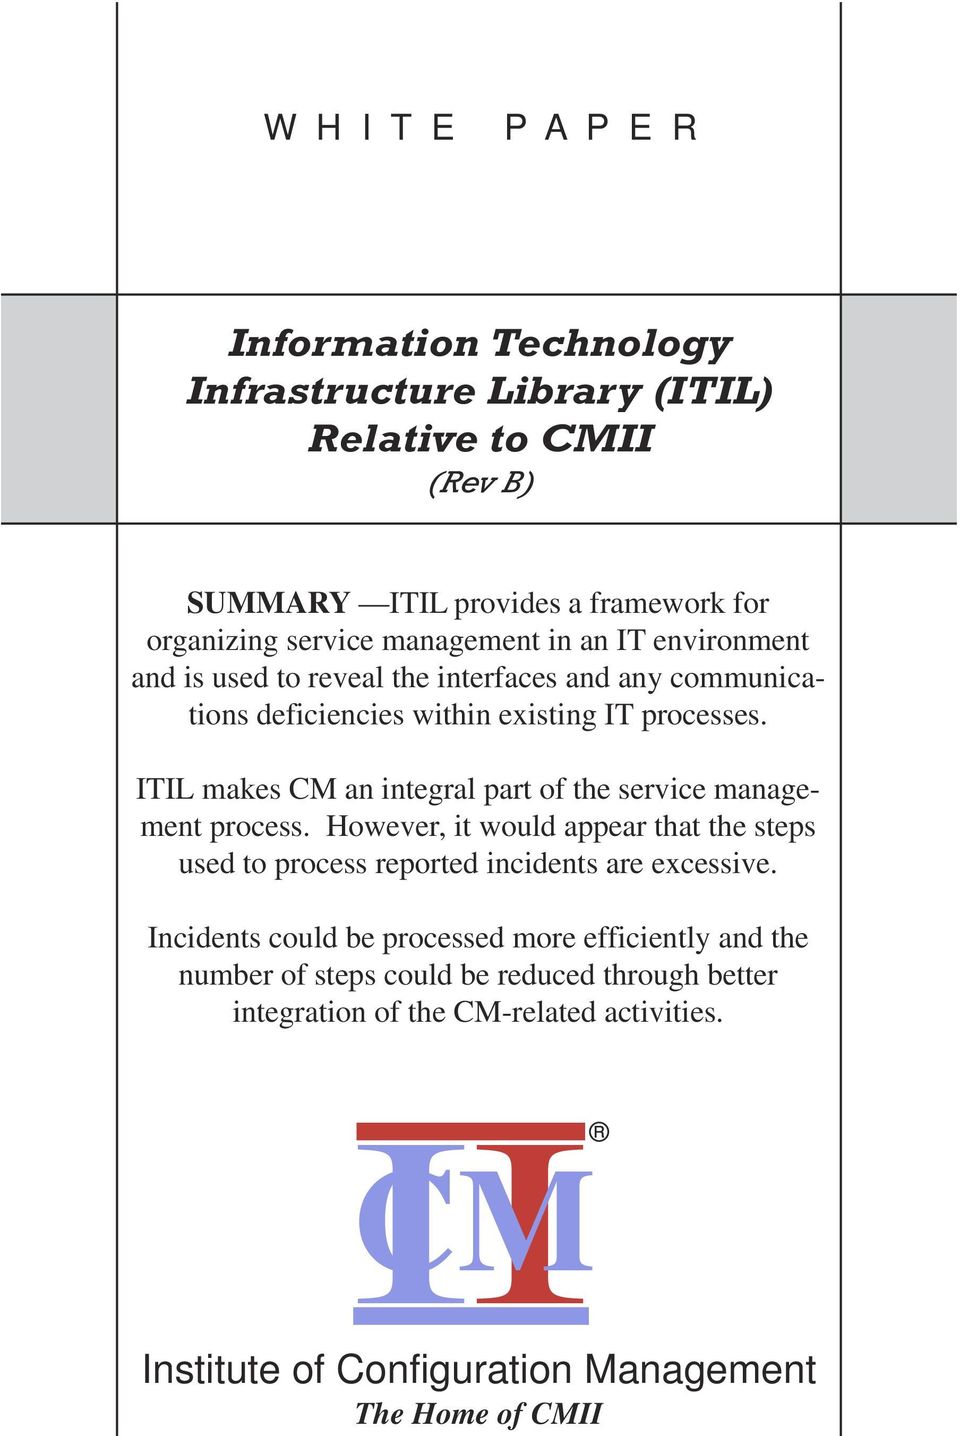 ITIL makes CM an integral part of the service management process. However, it would appear that the steps used to process reported incidents are excessive.